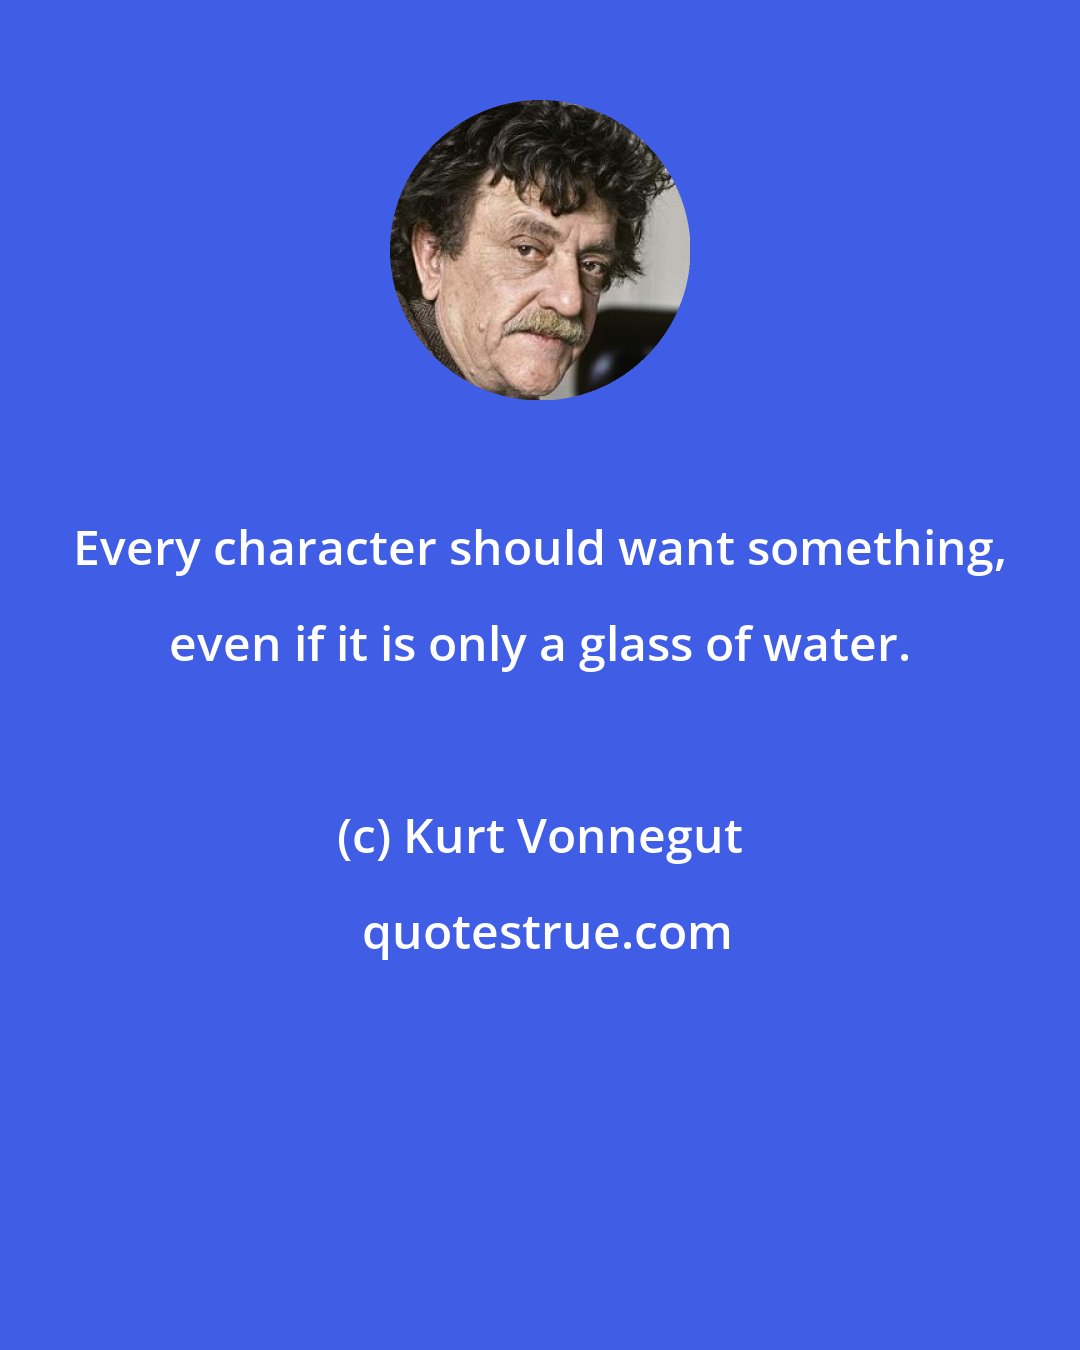 Kurt Vonnegut: Every character should want something, even if it is only a glass of water.